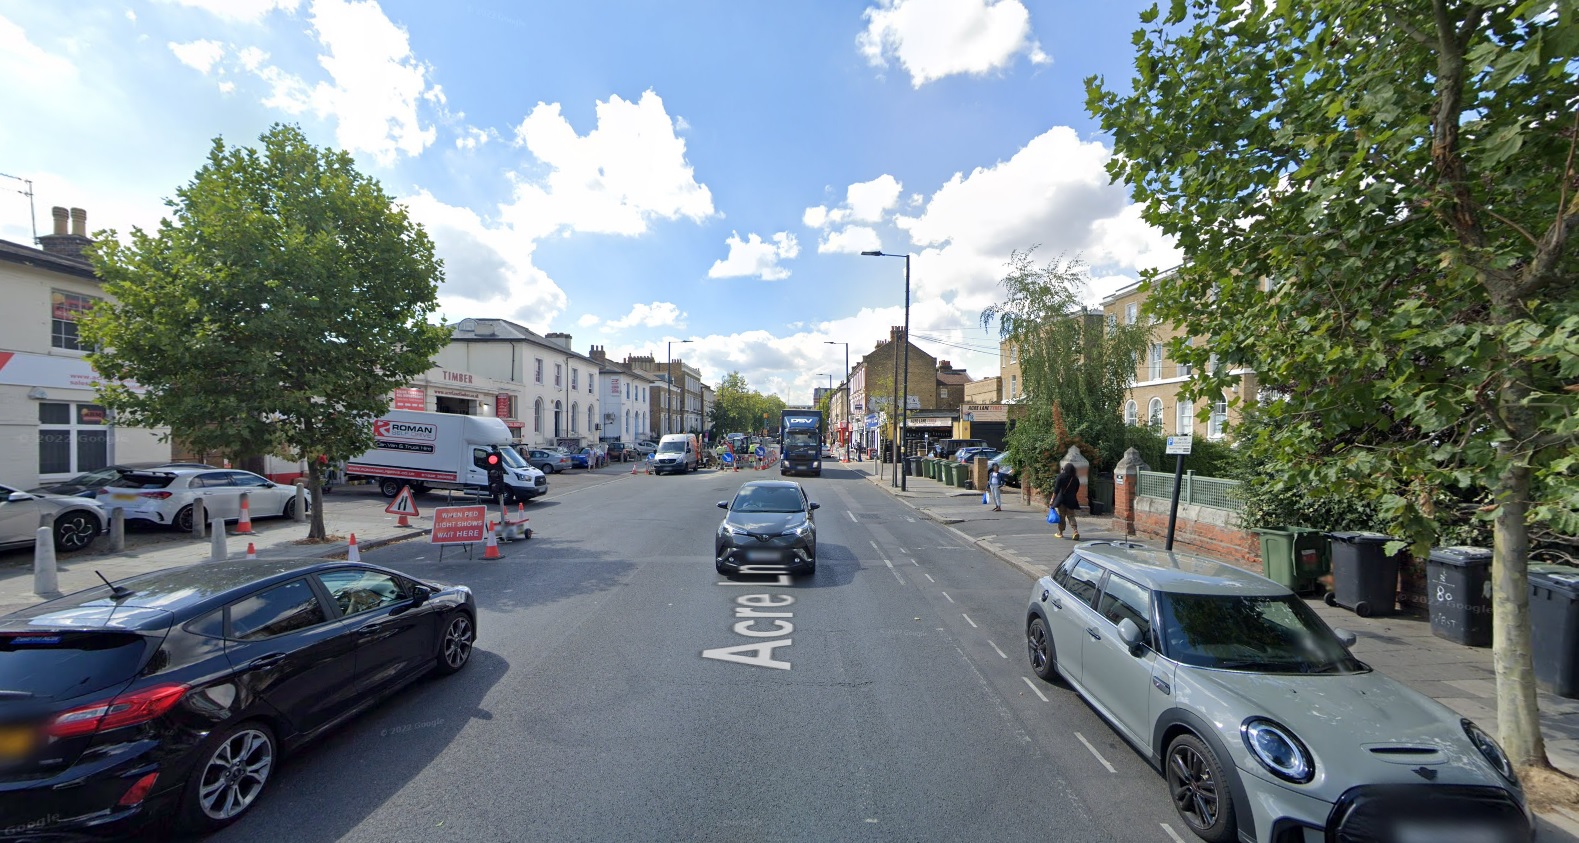 Bradford man fined for obstructing police in London